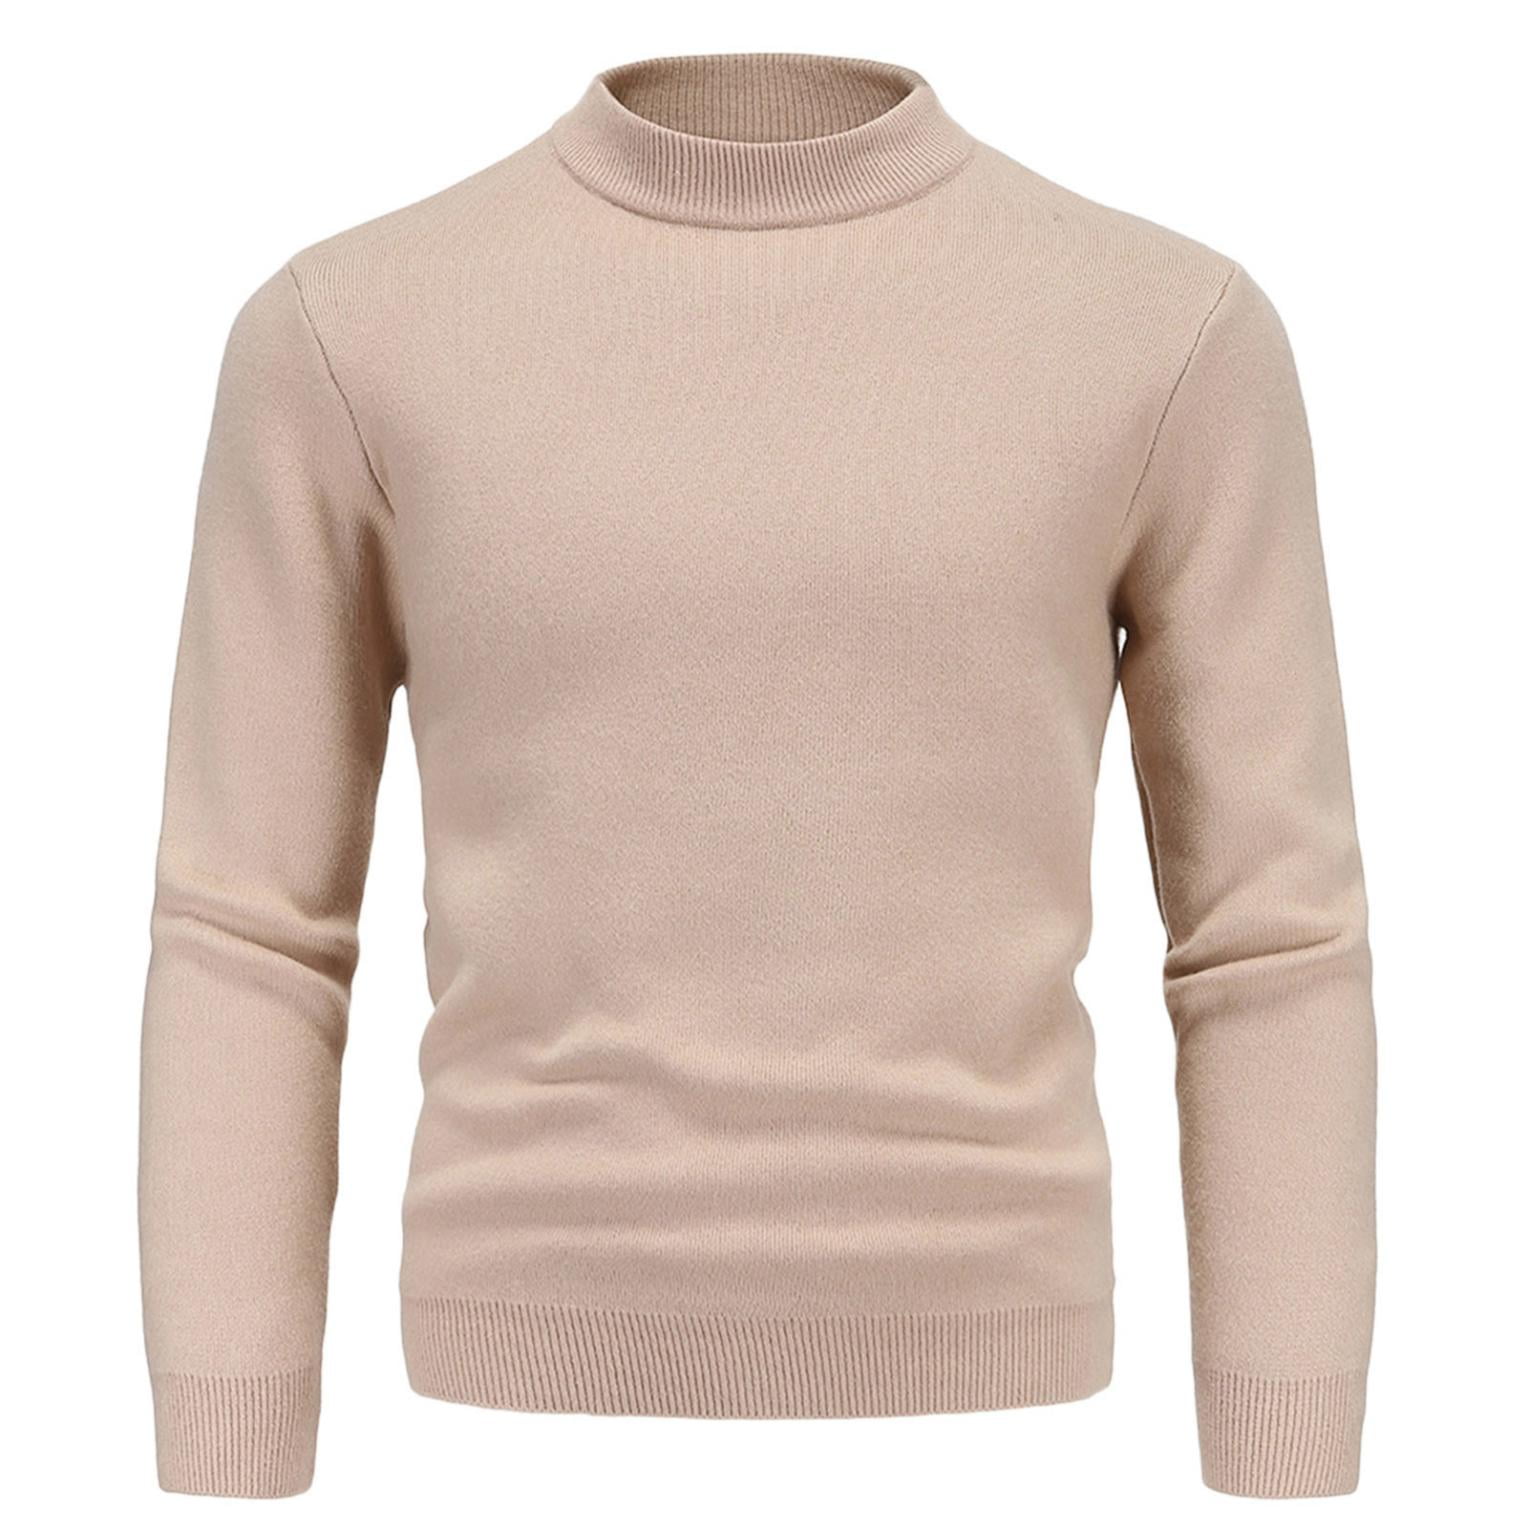 Hurrg Mens Long Sleeve Pullover Knitted Casual Turtleneck Slim Fit Color Block Sweater 